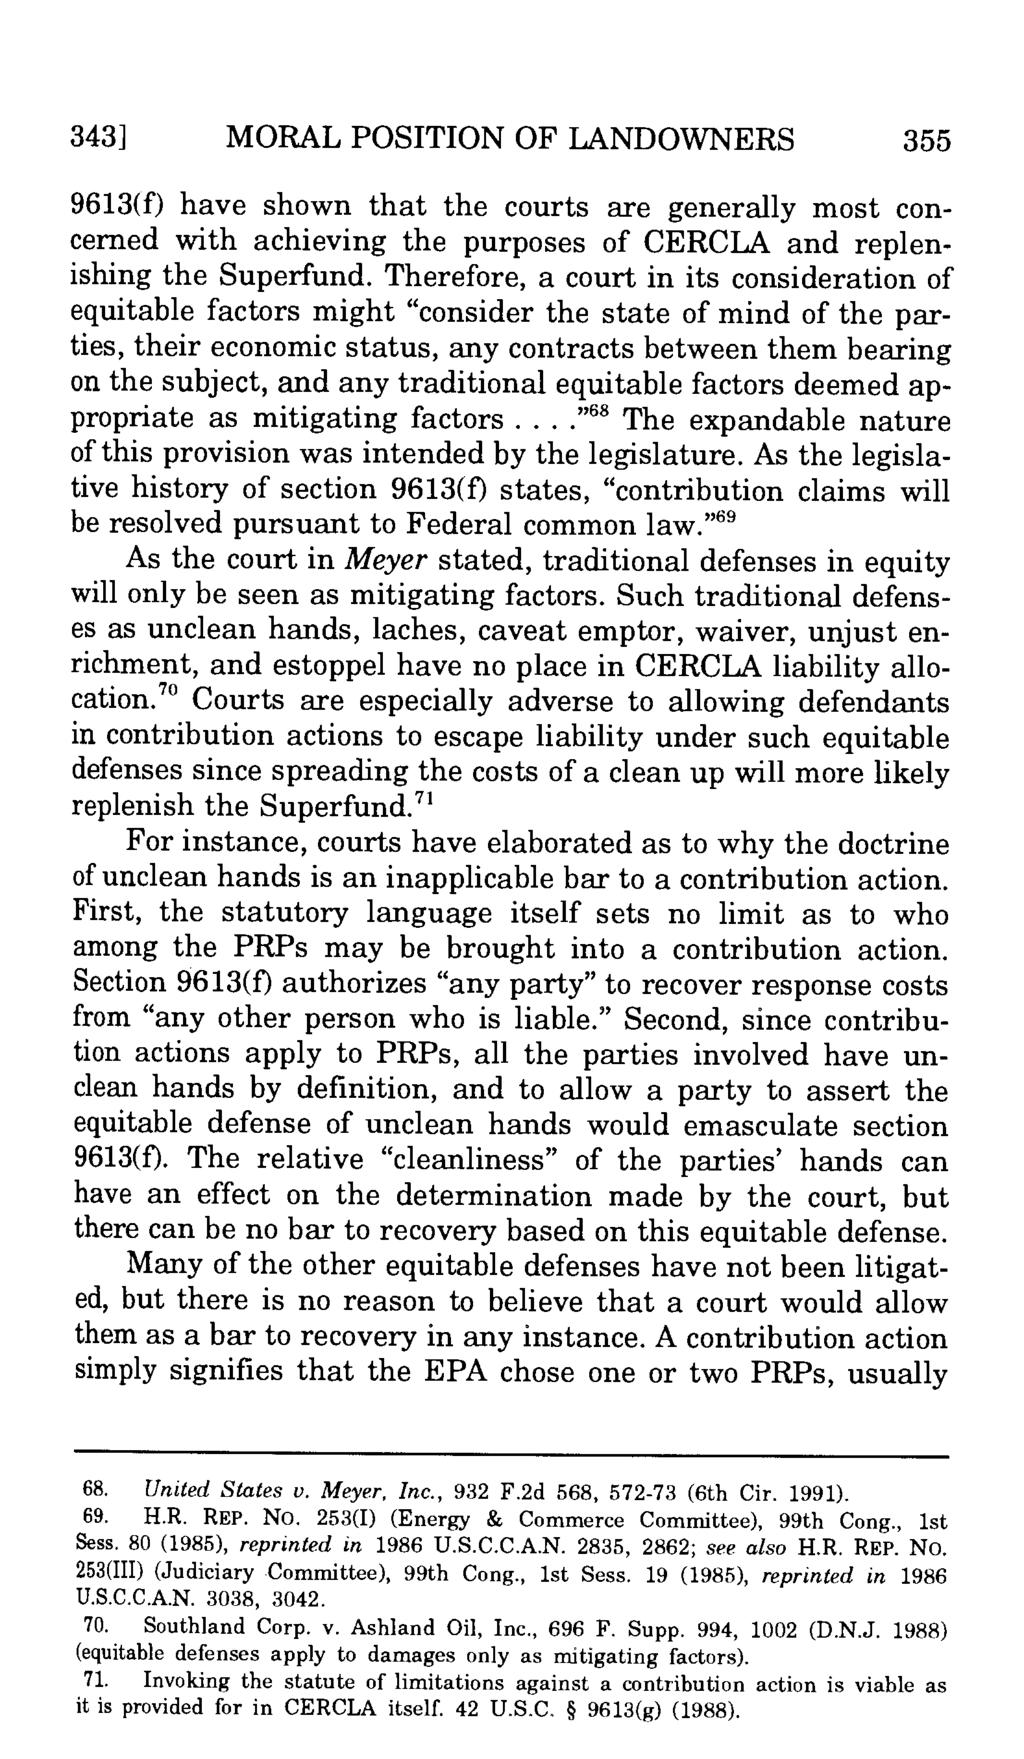 343] MORAL POSITION OF LANDOWNERS 355 9613(f) have shown that the courts are generally most concerned with achieving the purposes of CERCLA and replenishing the Superfund.